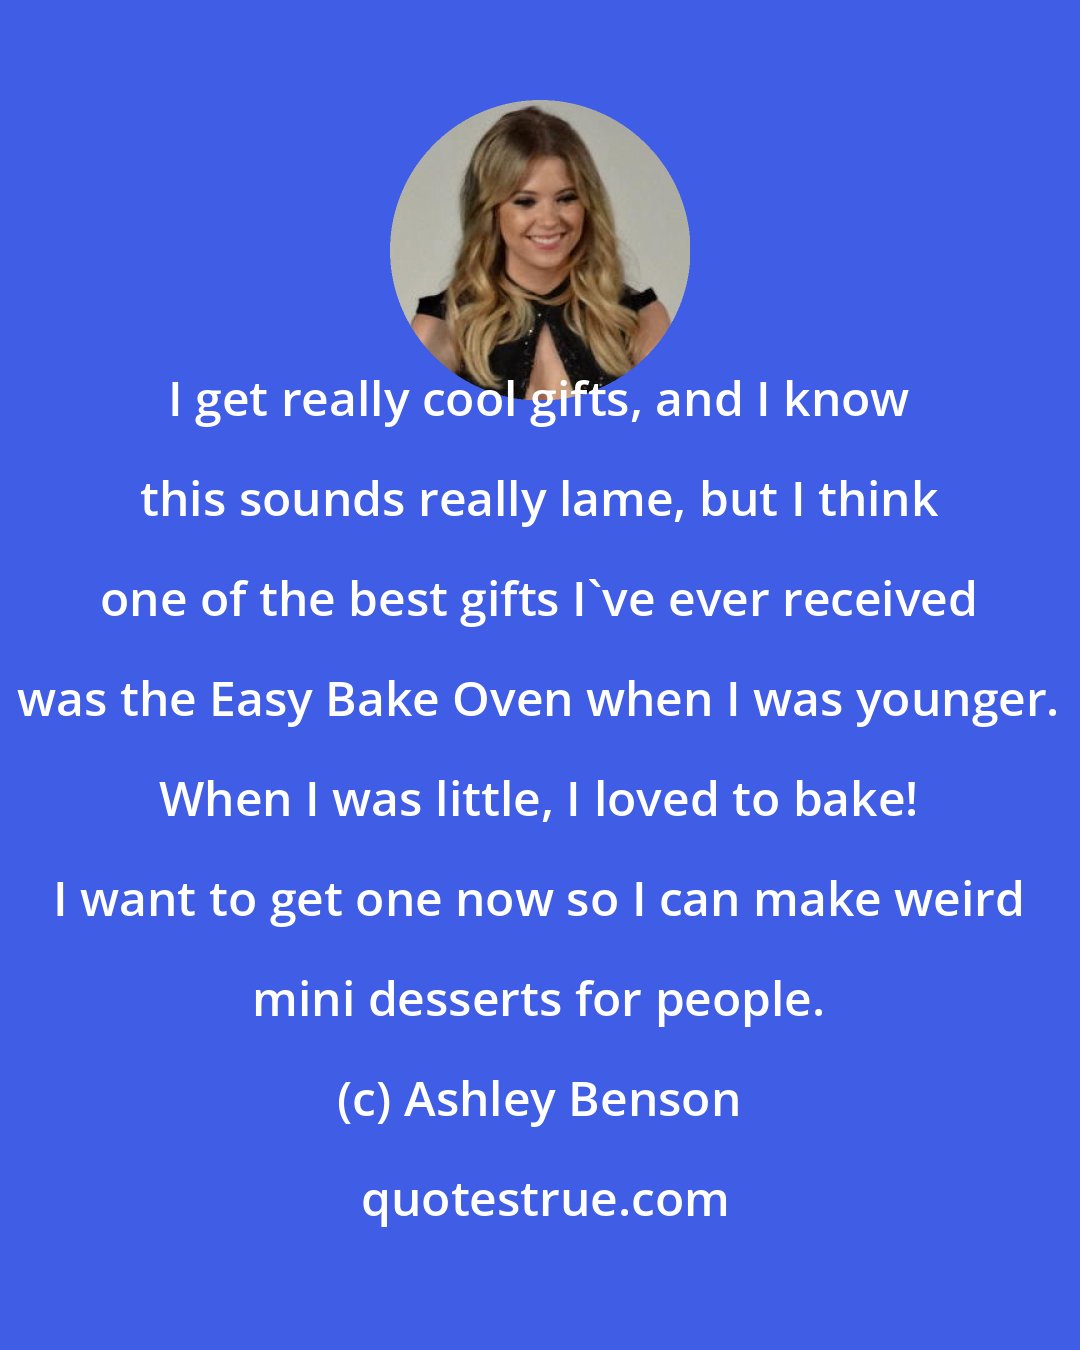 Ashley Benson: I get really cool gifts, and I know this sounds really lame, but I think one of the best gifts I've ever received was the Easy Bake Oven when I was younger. When I was little, I loved to bake! I want to get one now so I can make weird mini desserts for people.